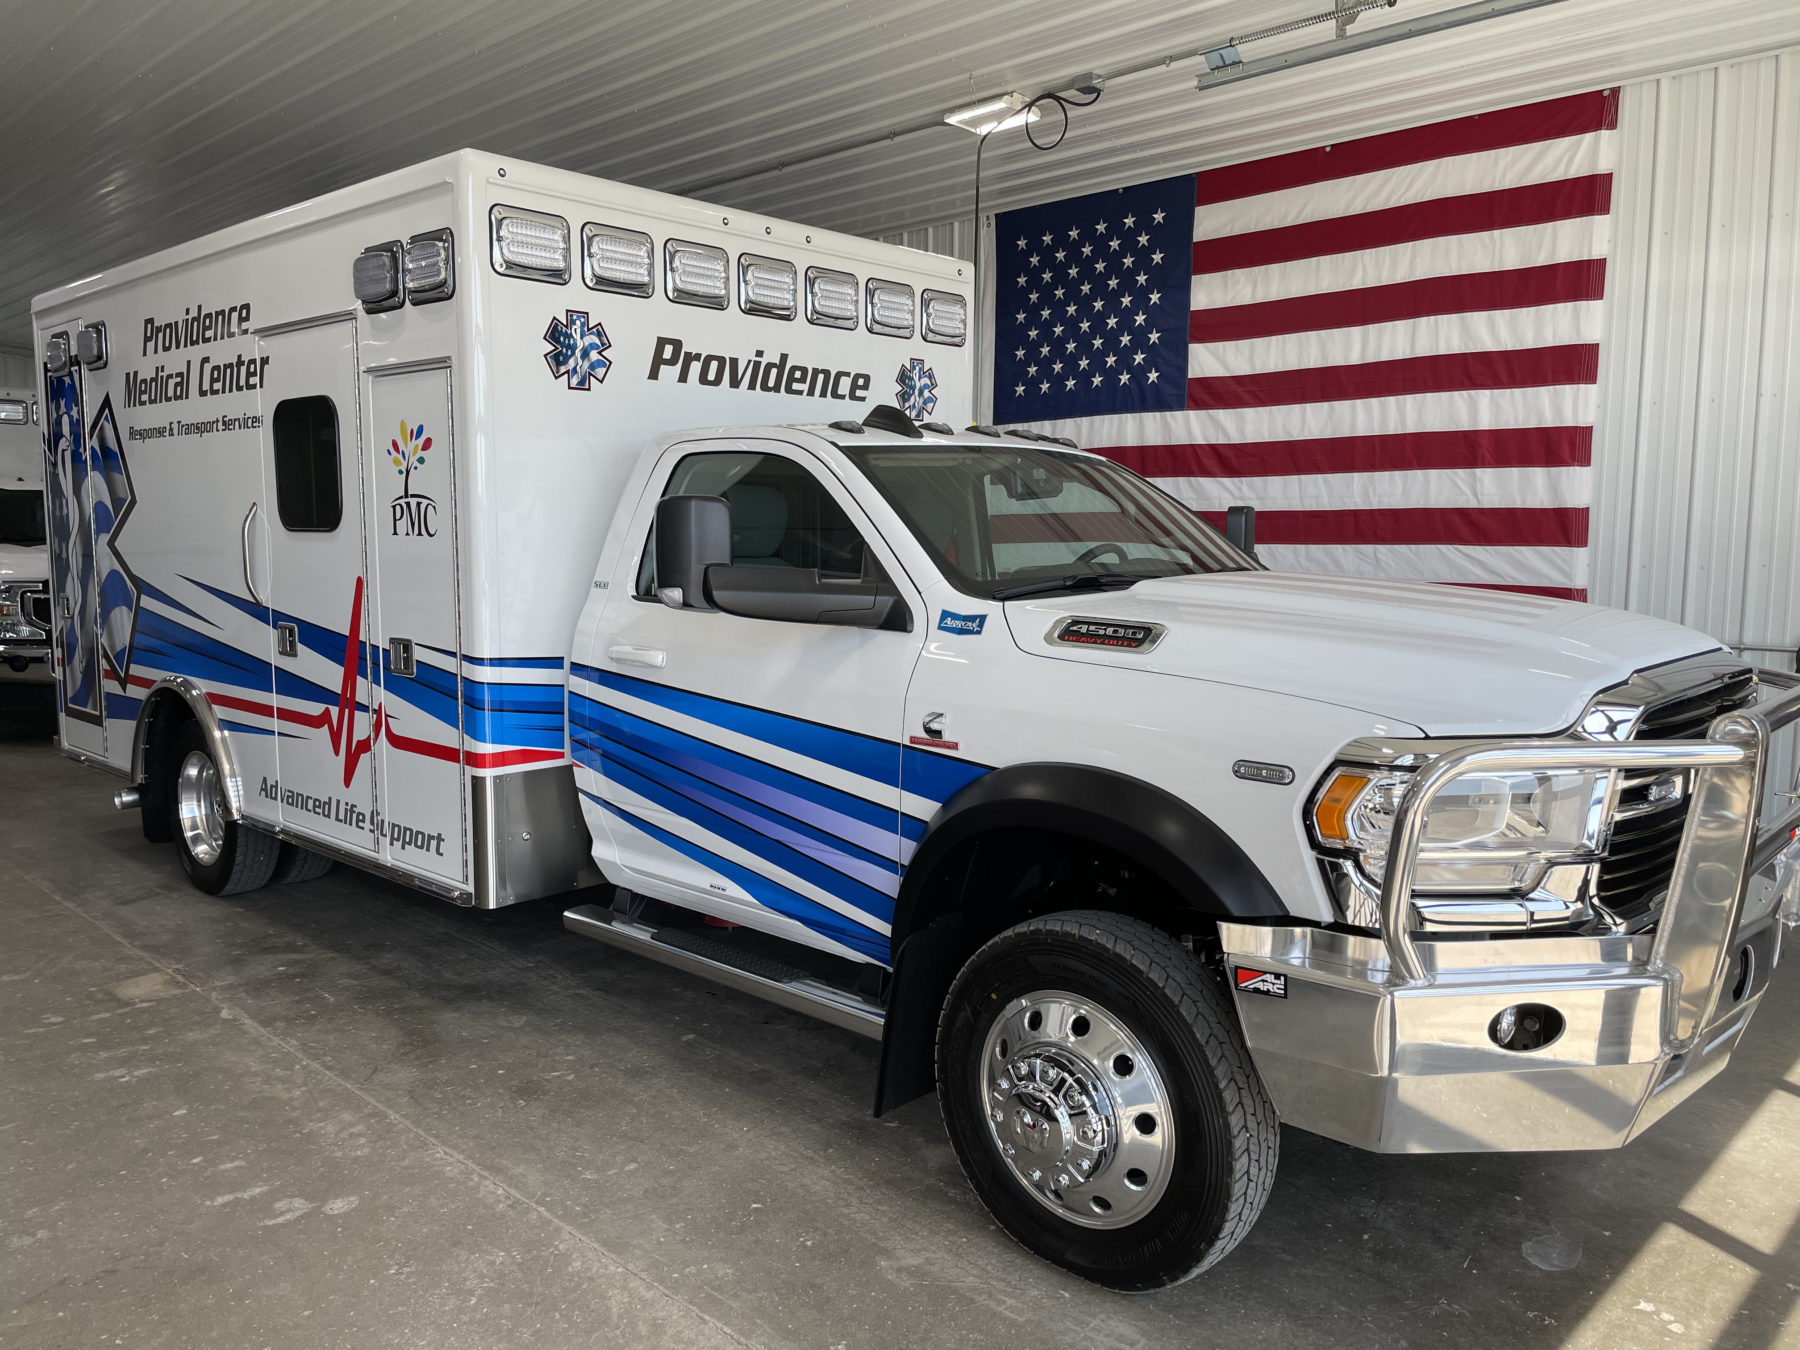 2020 Ram 4500 4x4 Heavy Duty Ambulance For Sale – Picture 1